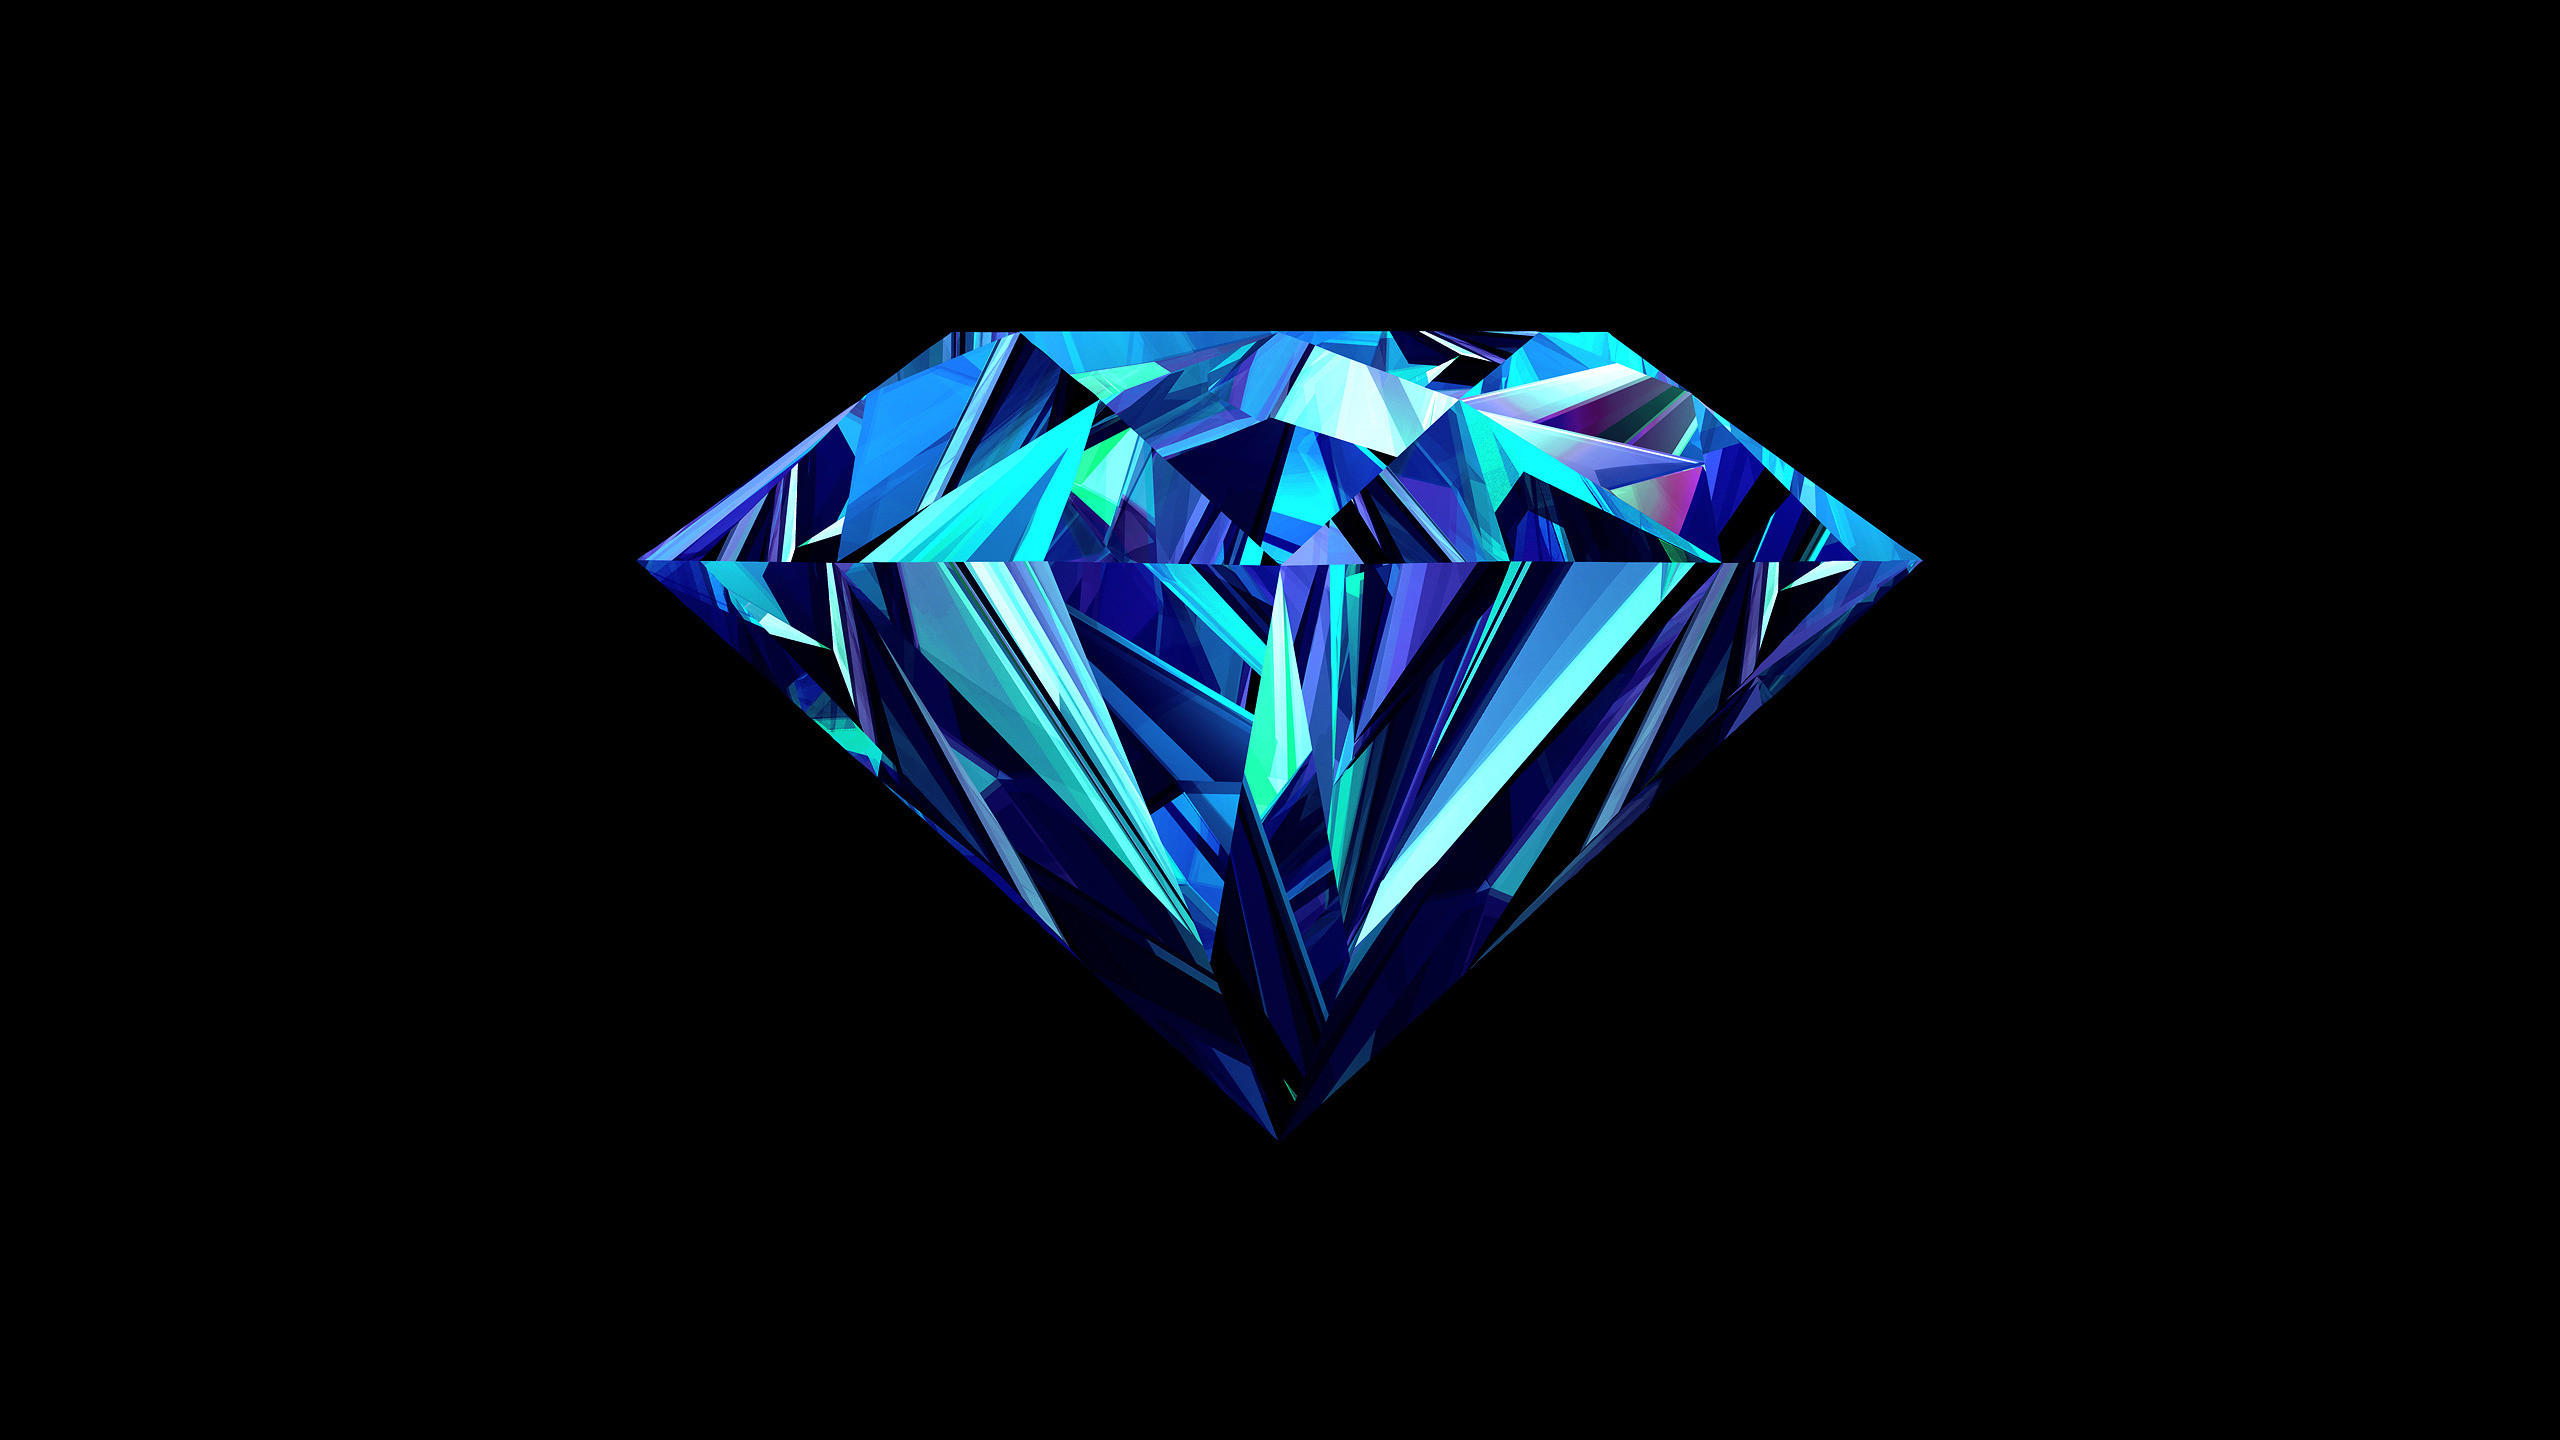 2560x1440 Diamond wallpaper, Wallpaper for iphone and Wallpapers